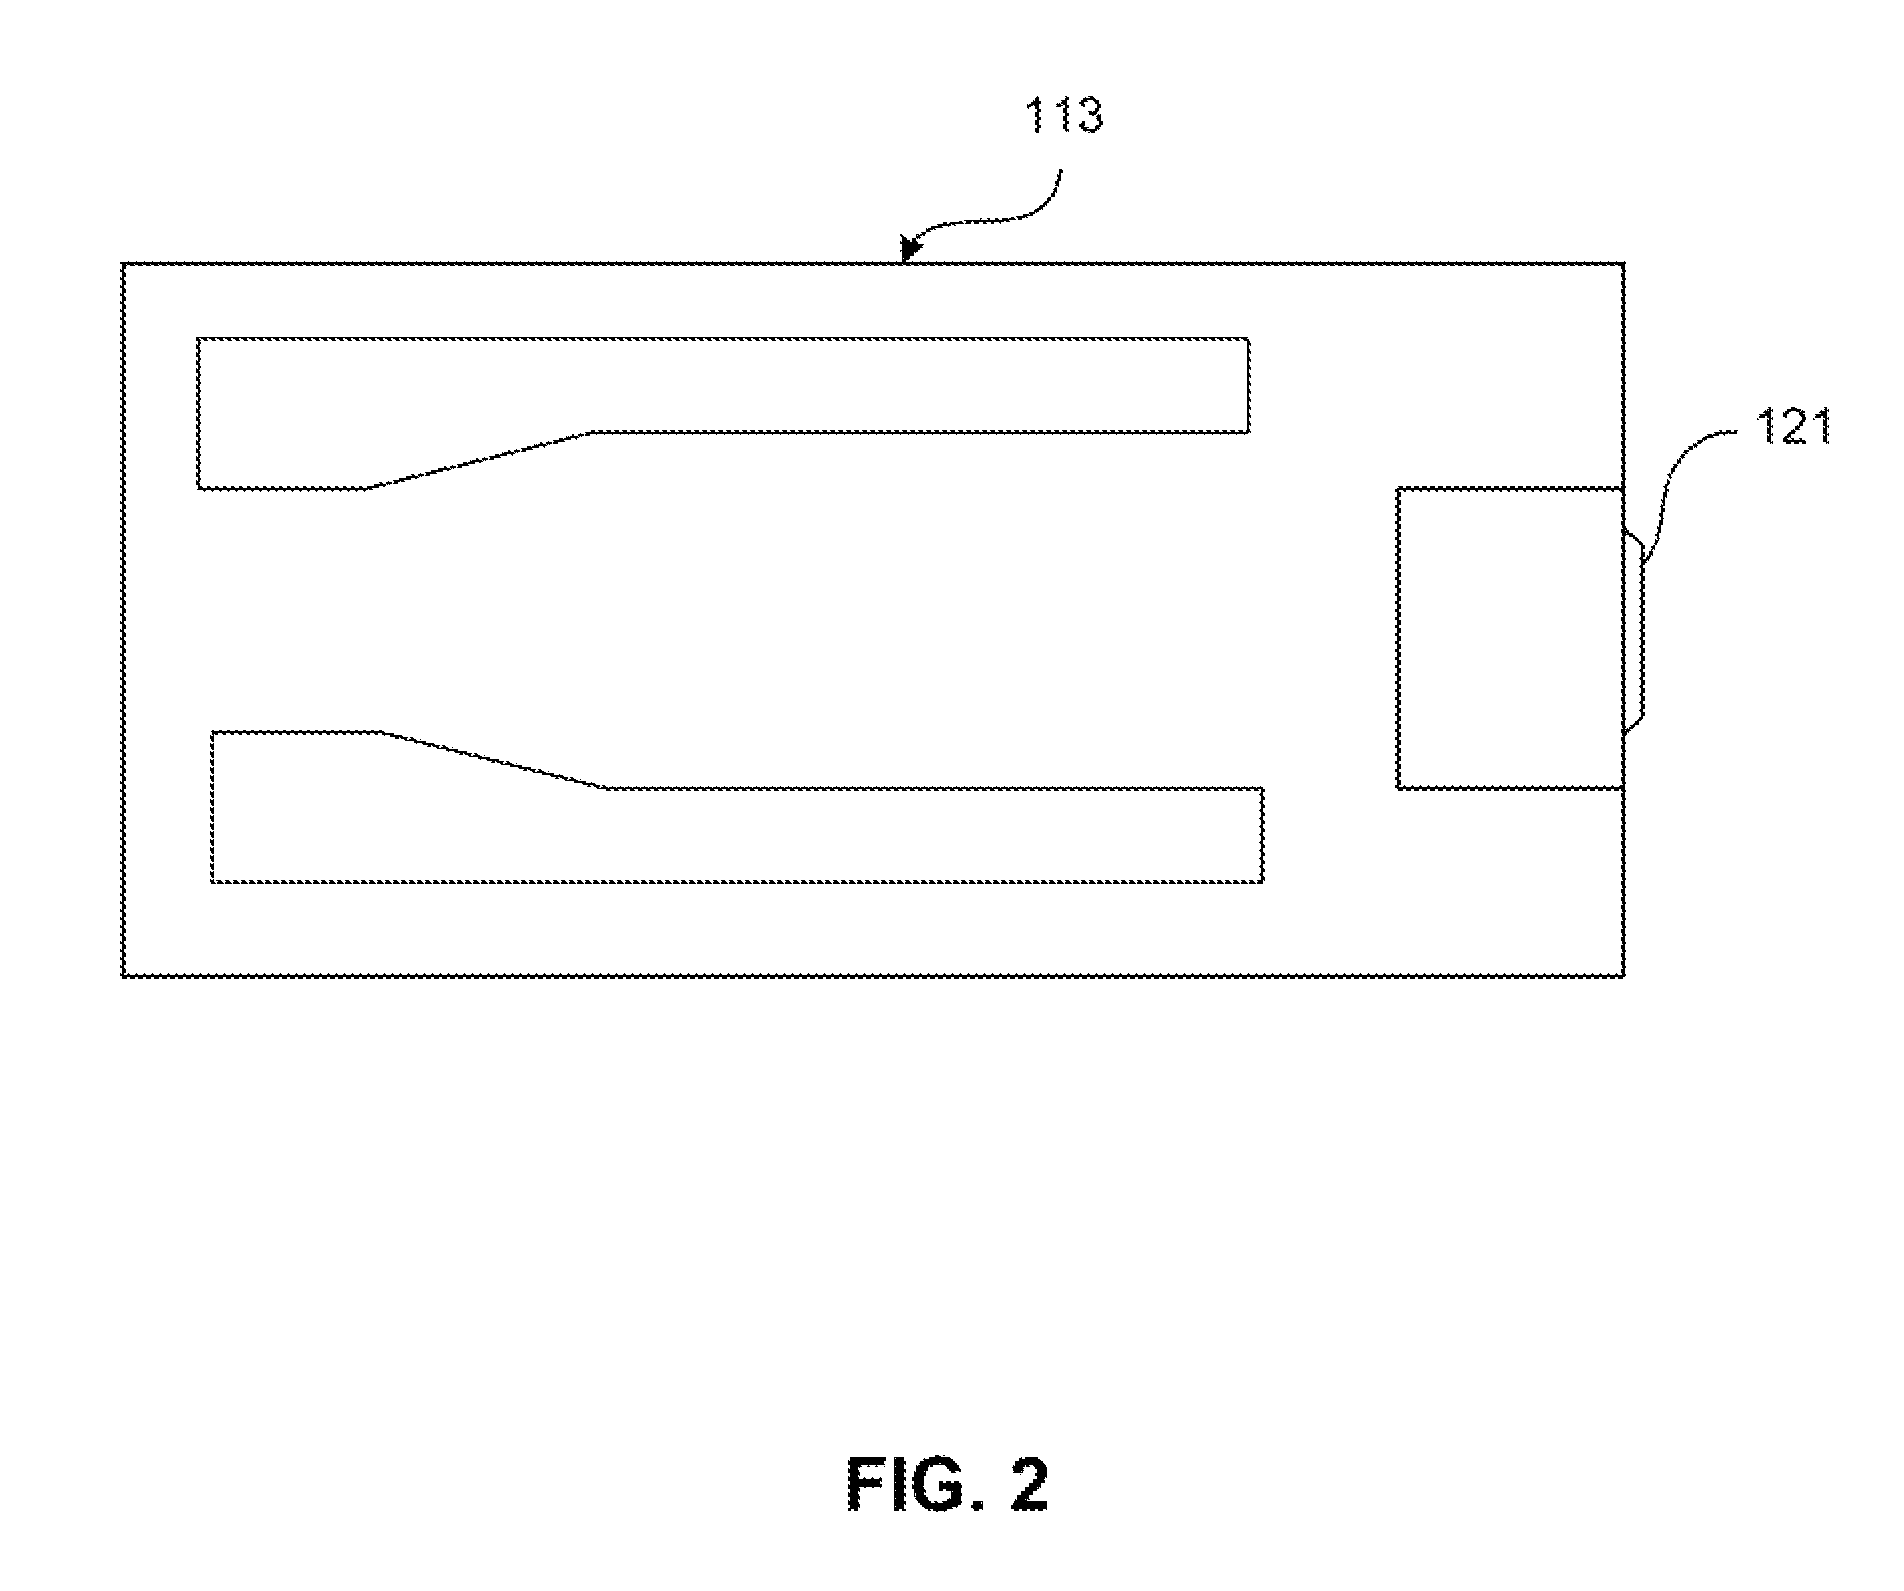 Magnetic recording head with adjacent track interference suppresion by novel microwave-assisted magnetic recording element